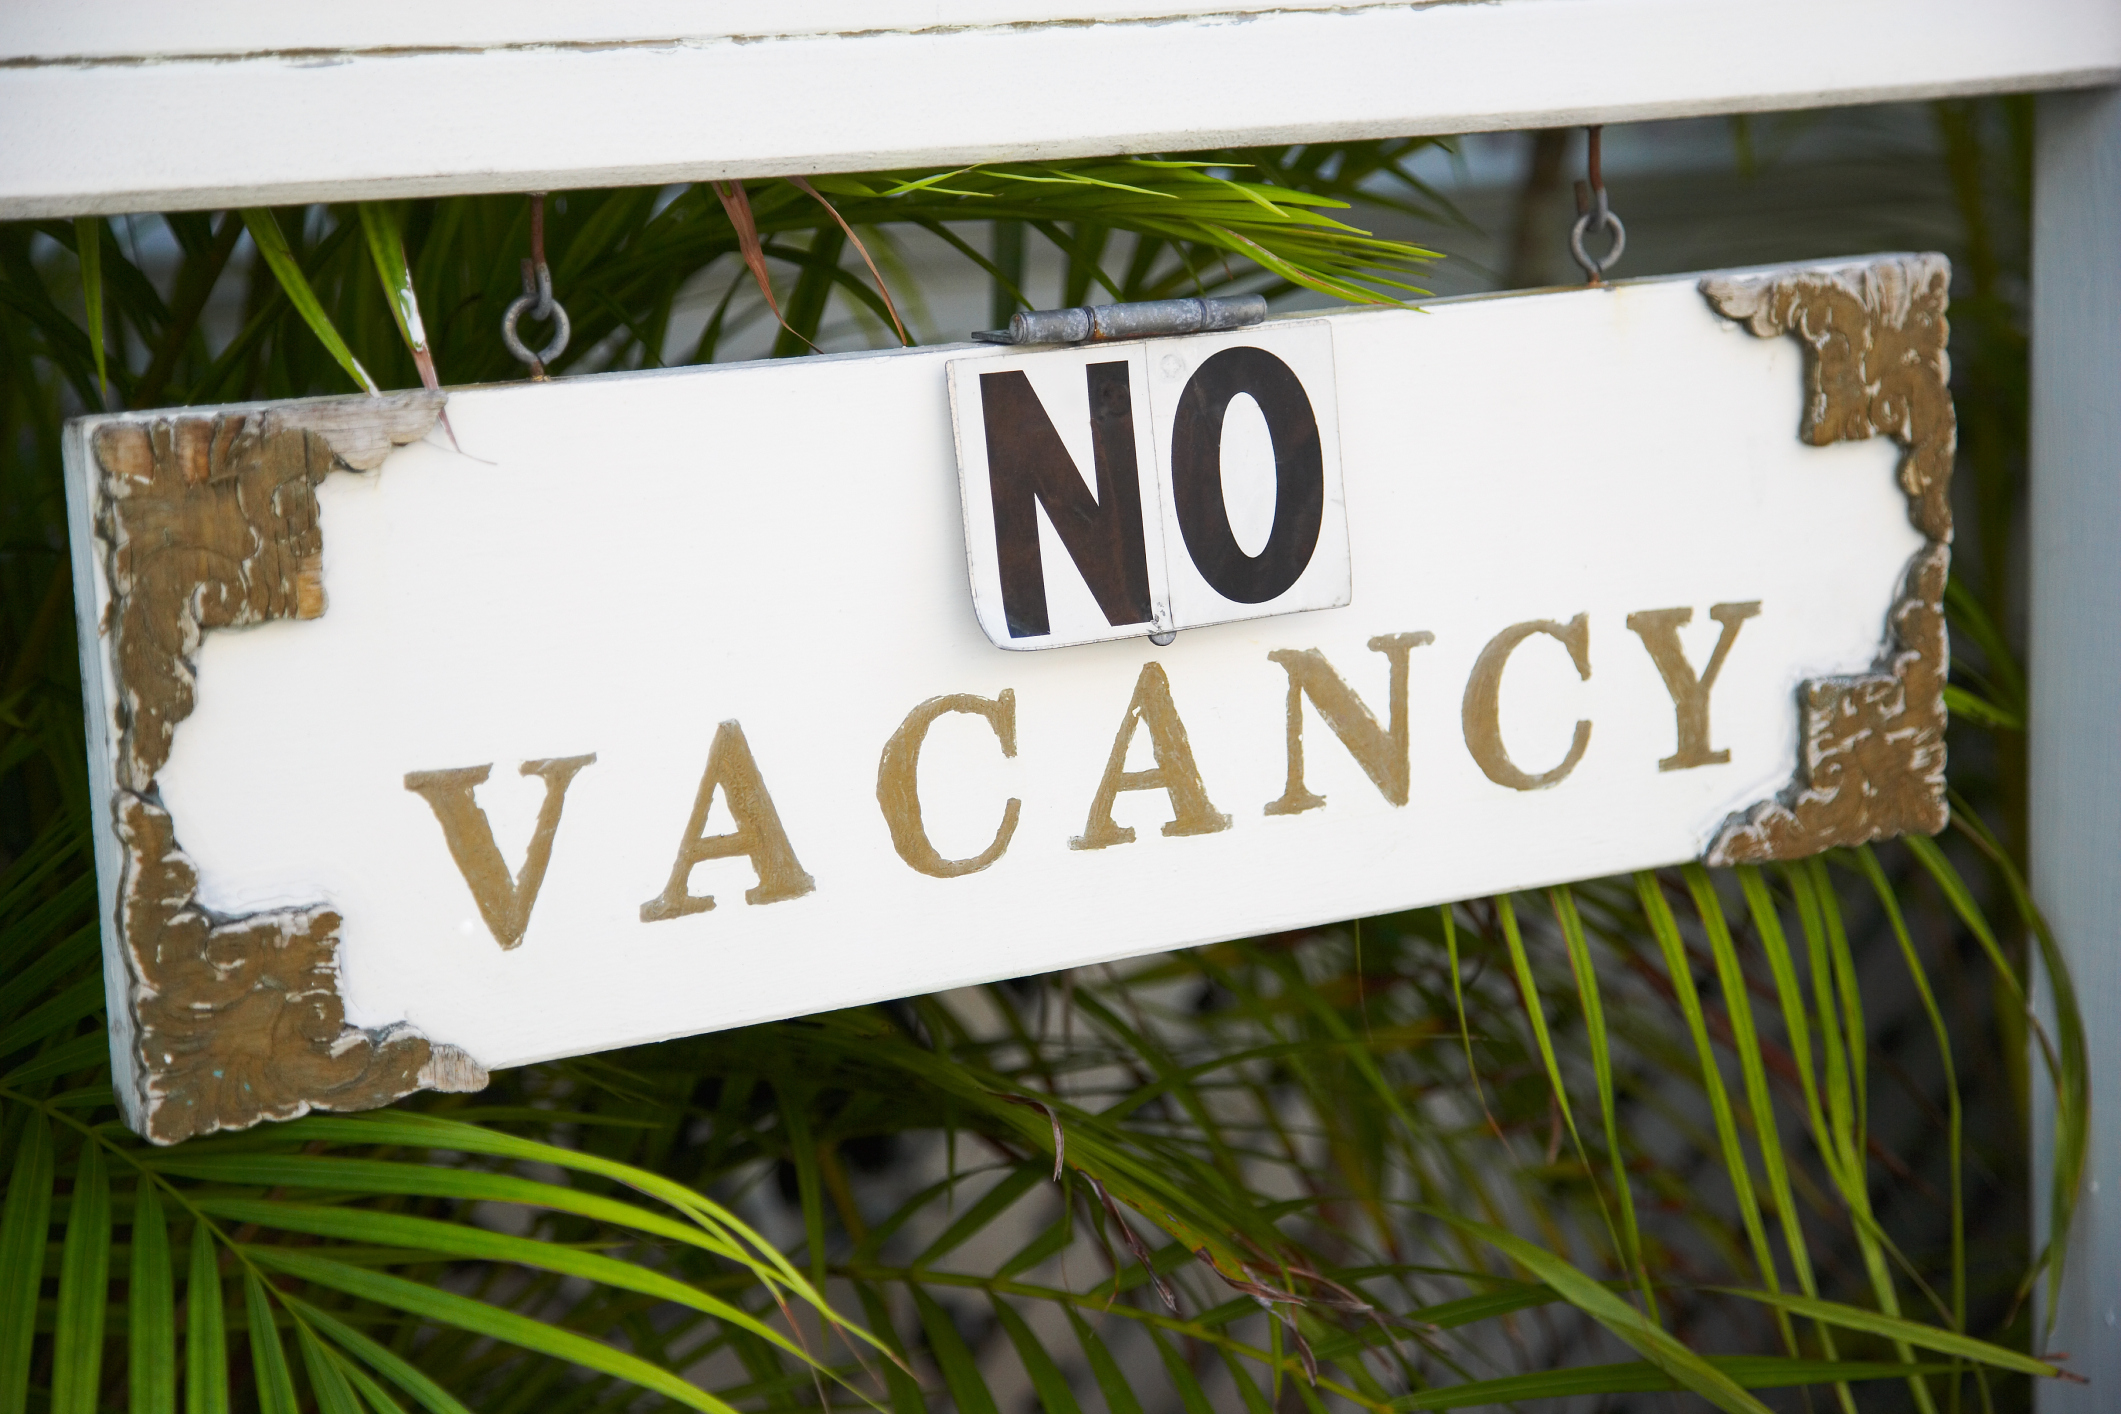 Declining Geographic Mobility Means Lower Turnover for U.S. Multifamily ...